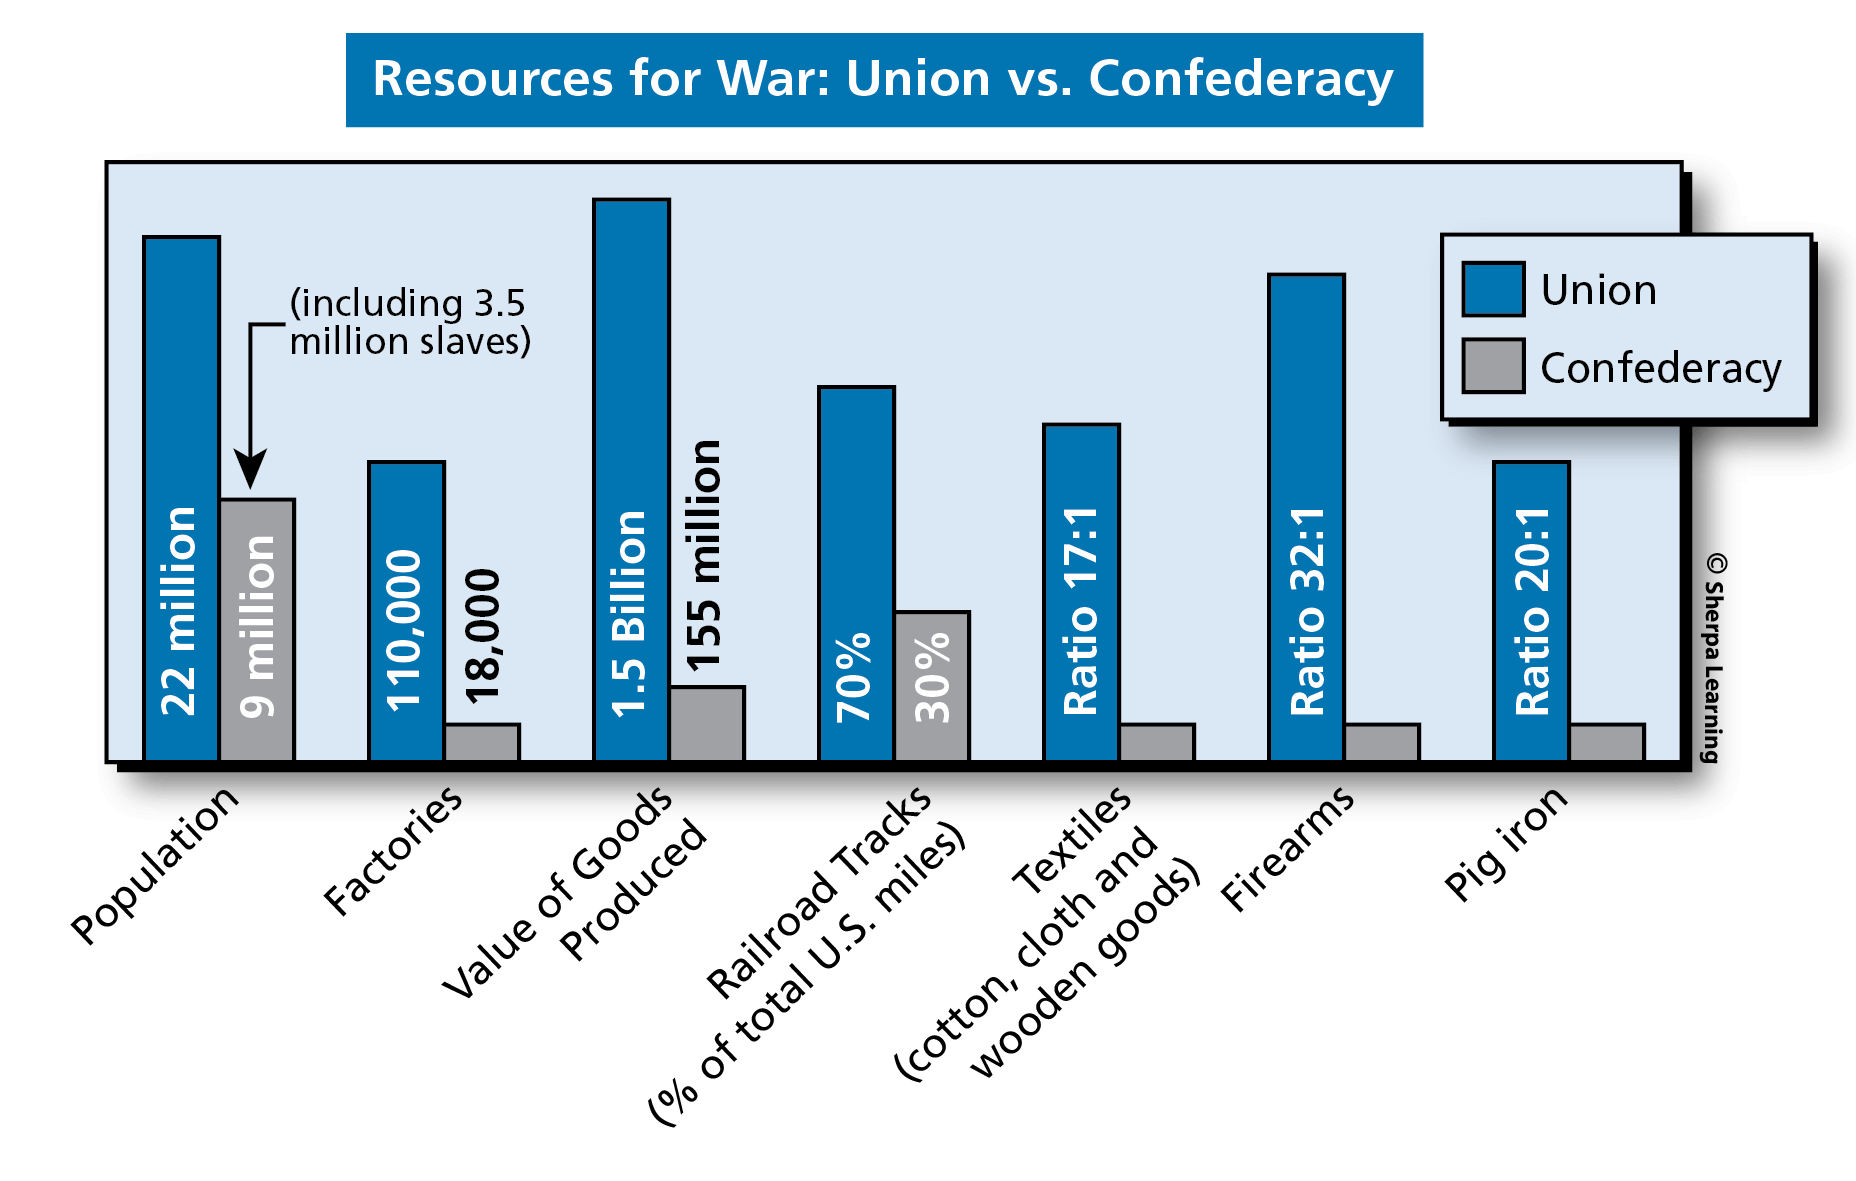 Skillbook Visual Source Exercise #7 - Chart: Resources for War: Union vs. Confederacy